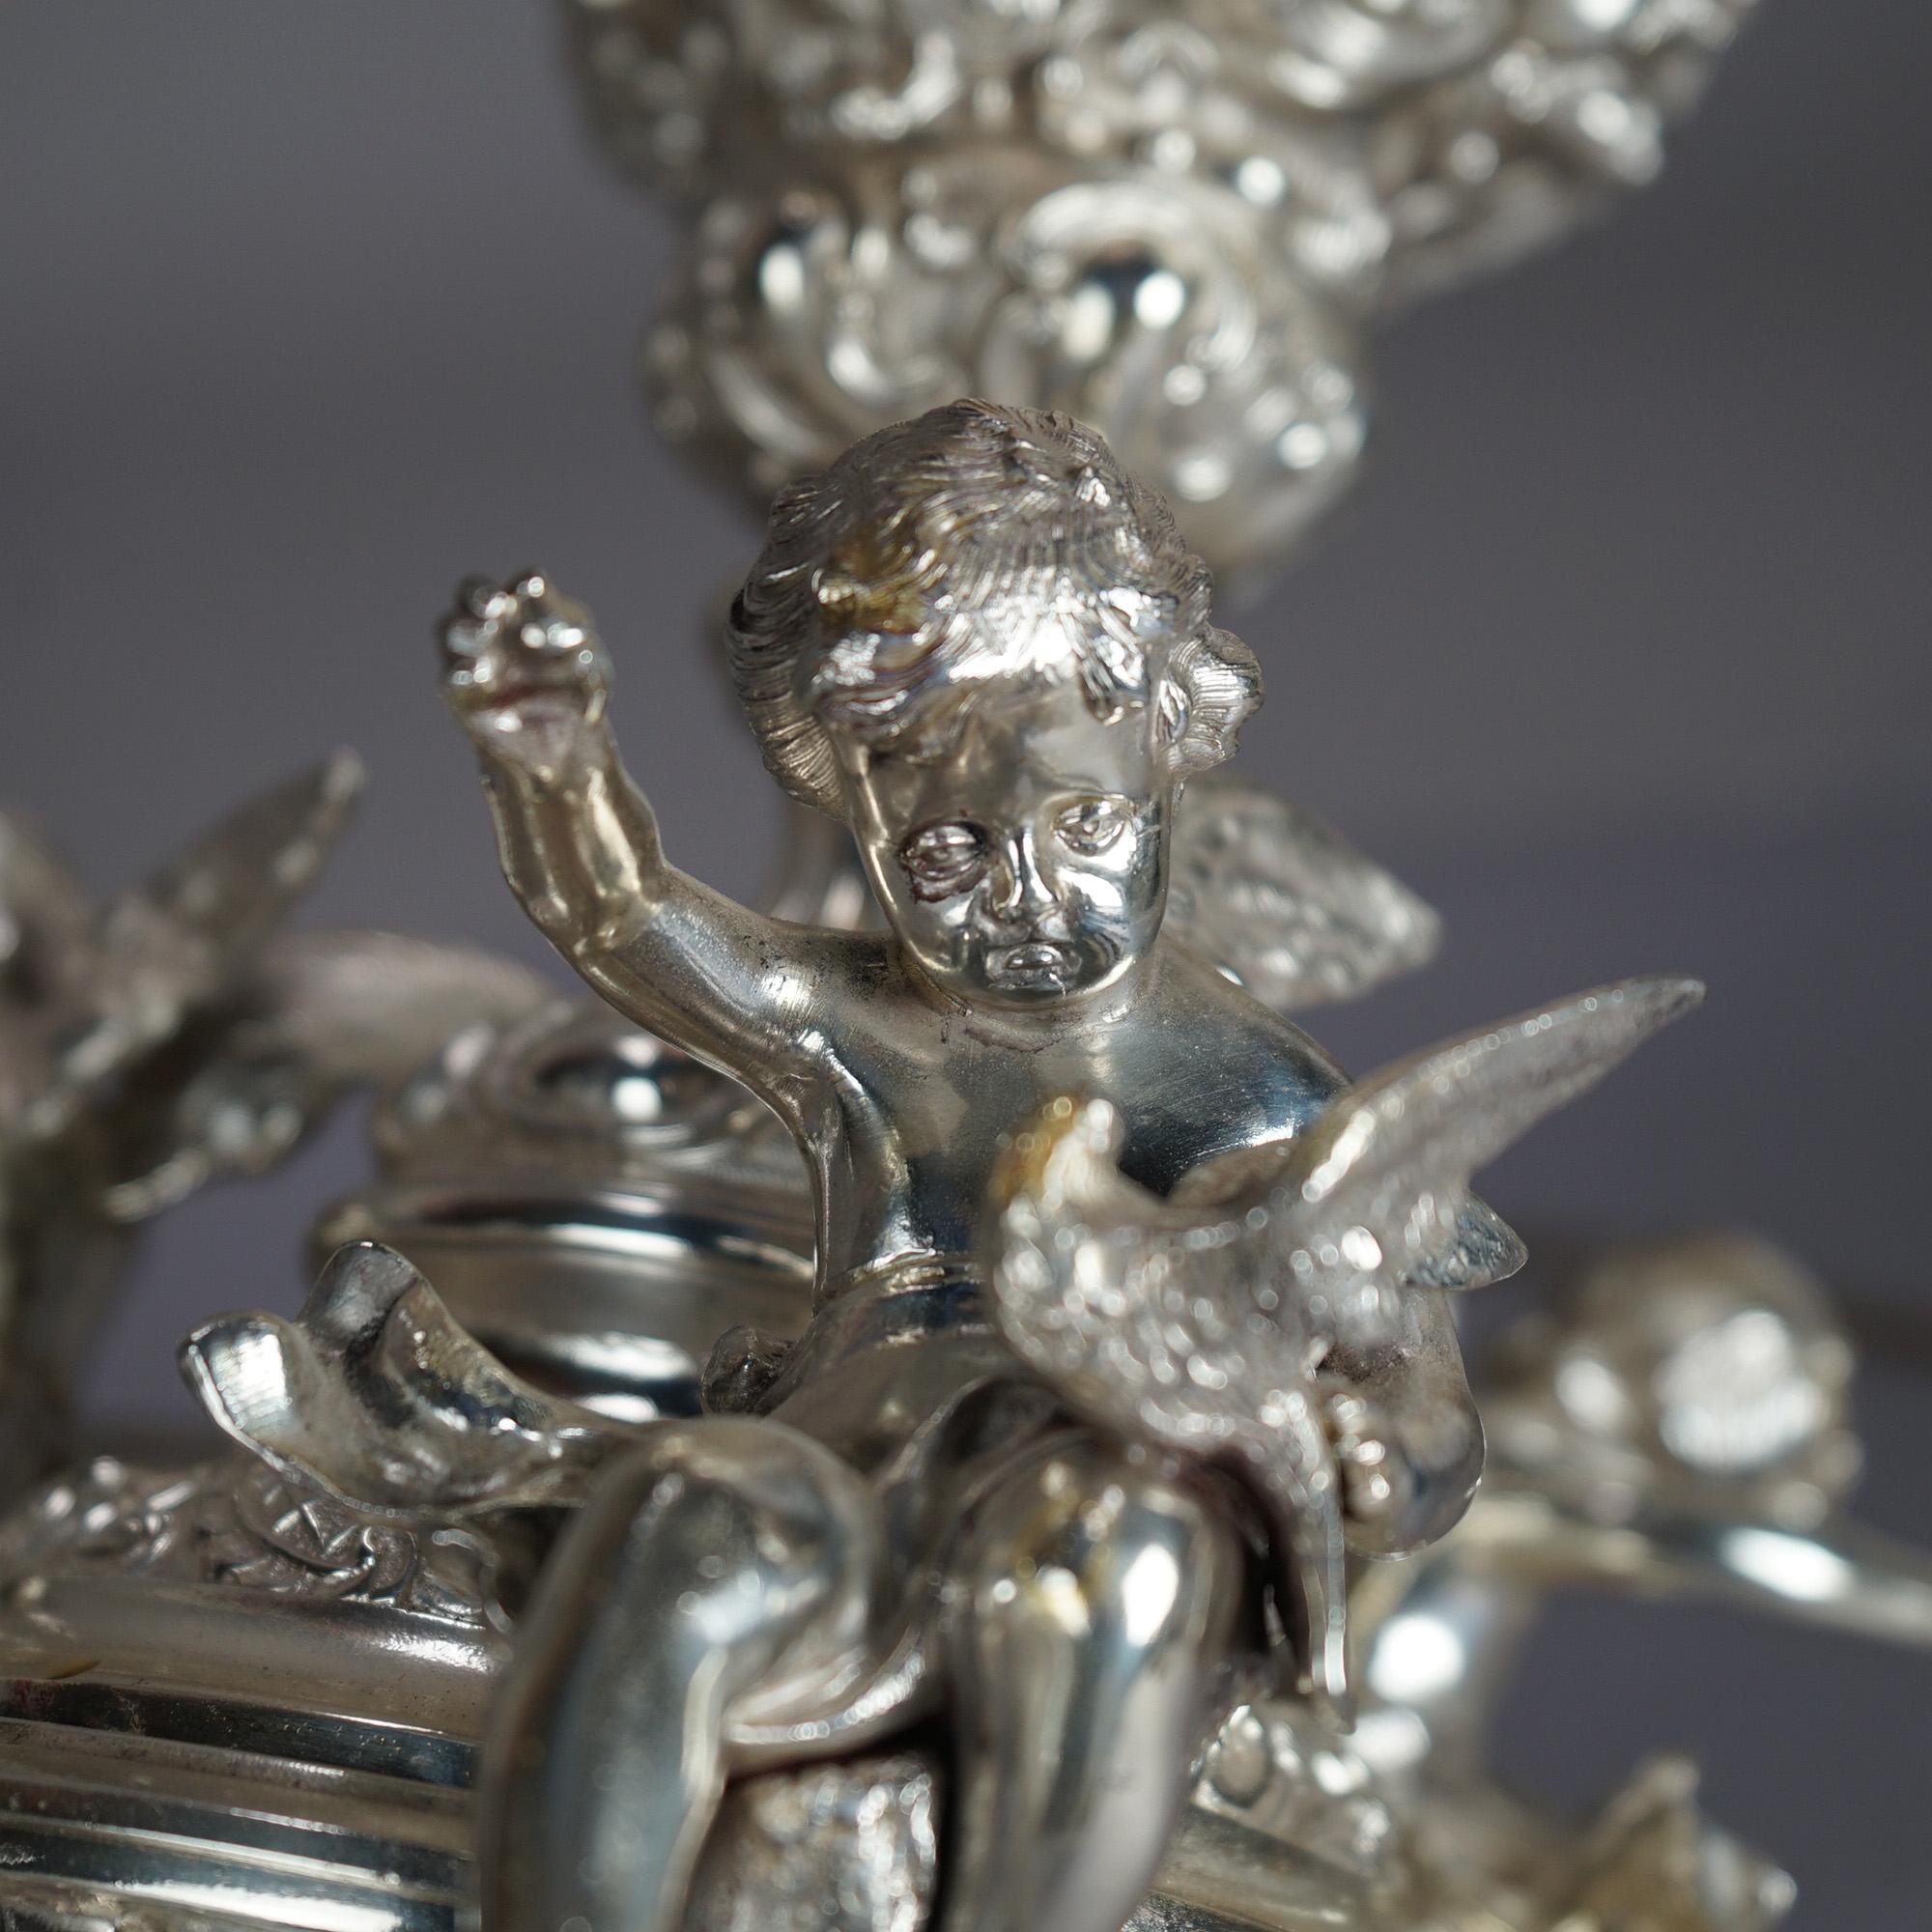 19th Century Antique Rococo Figural Silver Plate Parlor Lamp With Winged Cherubs c1890